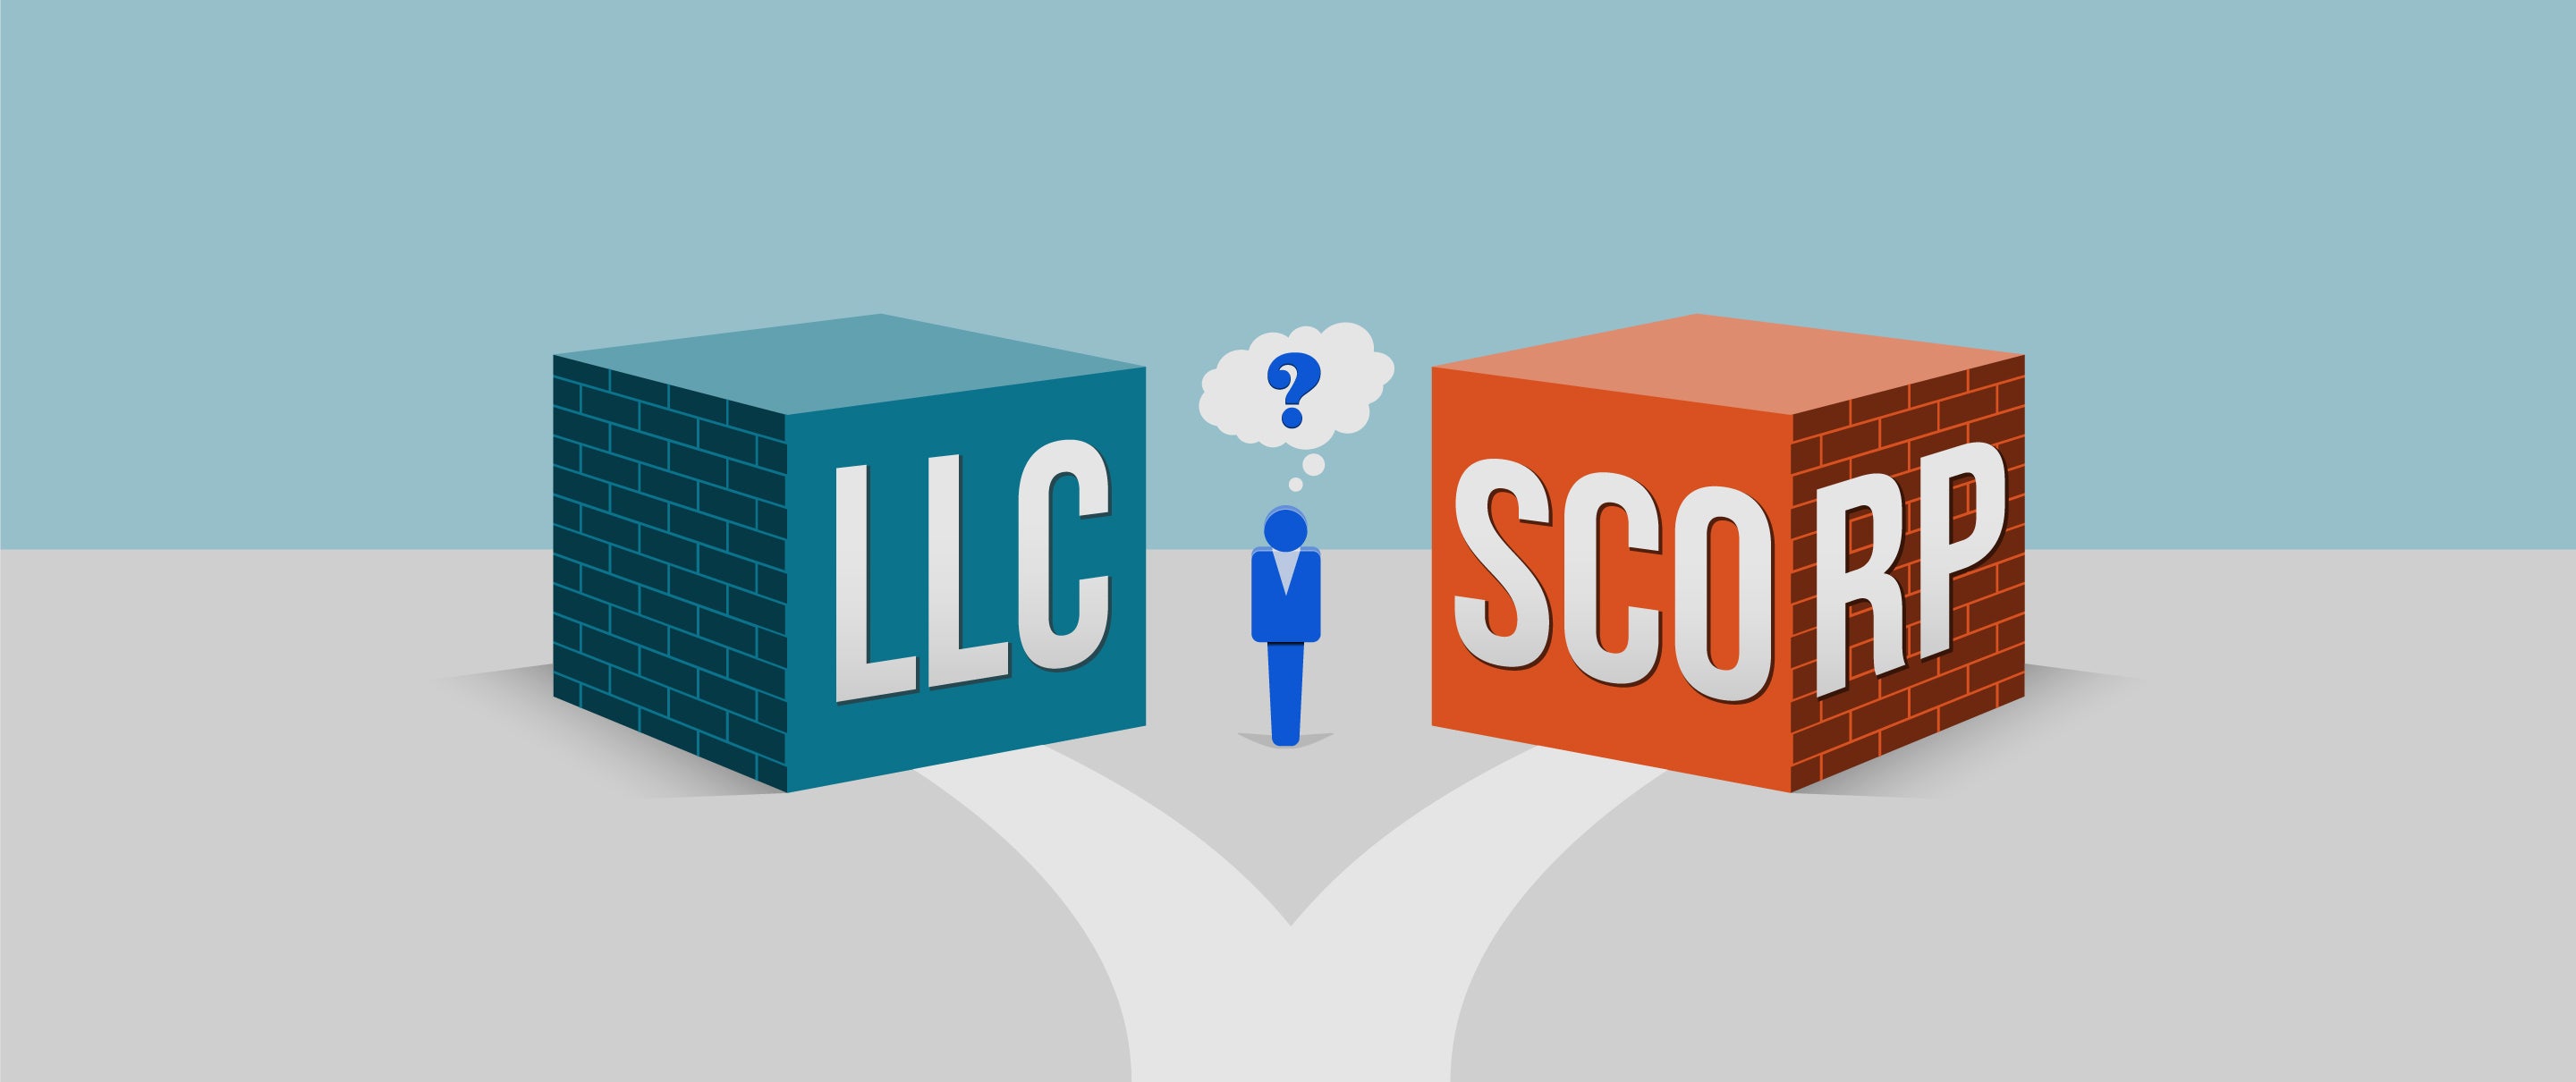 Moving from an LLC to an S Corp... How will my business be different?